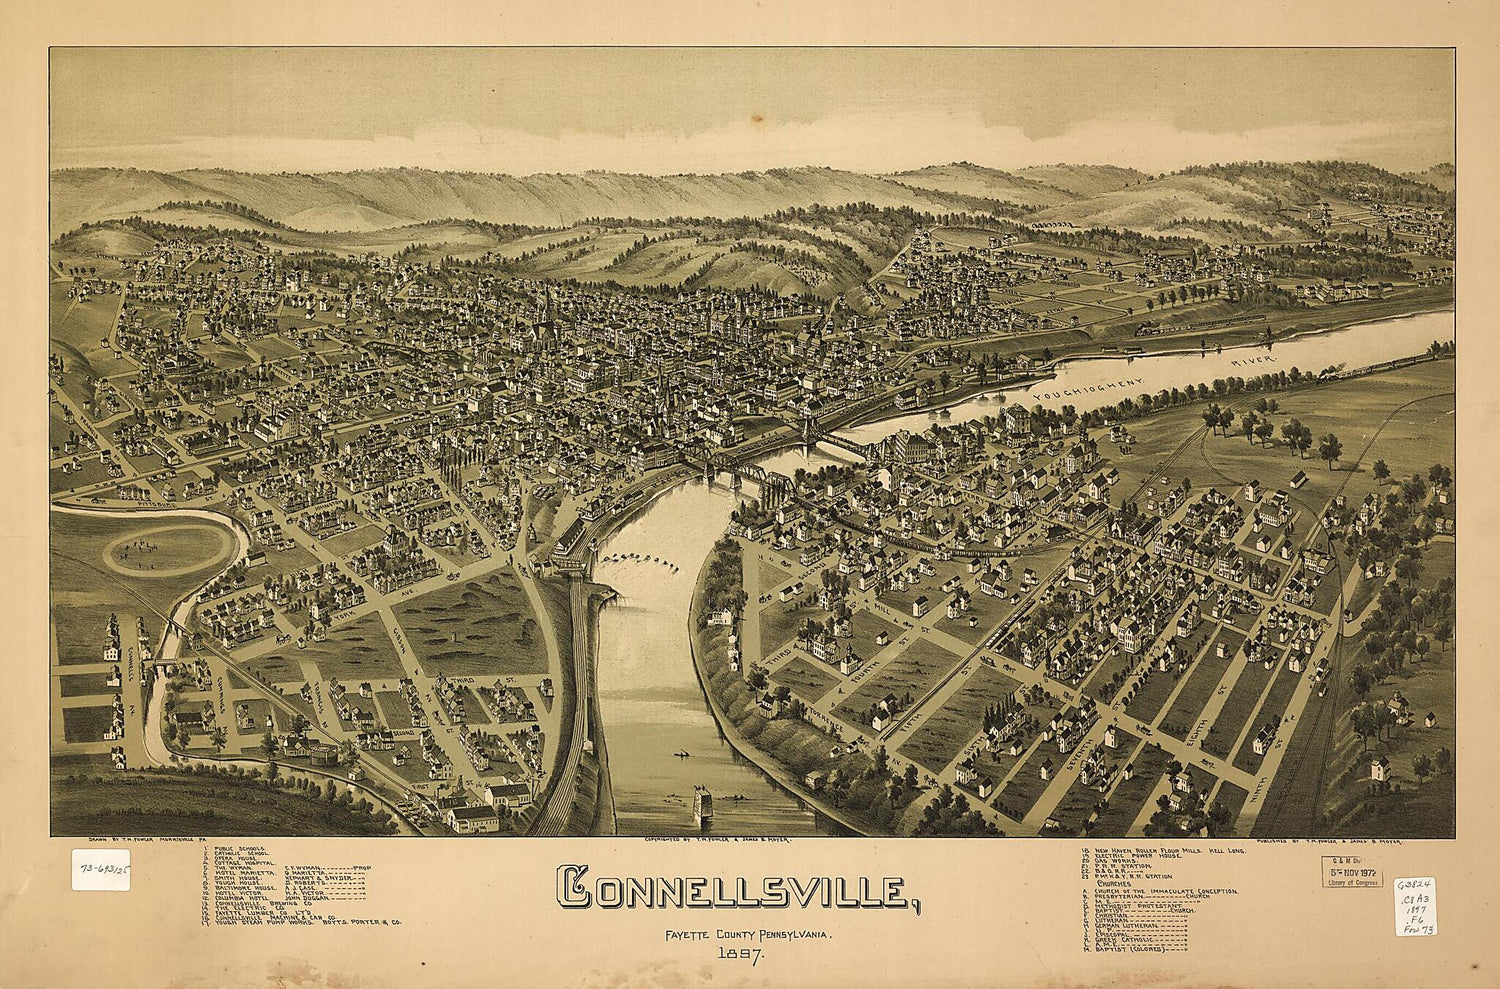 This old map of Connellsville, Fayette County, Pennsylvania from 1897 was created by T. M. (Thaddeus Mortimer) Fowler, James B. Moyer in 1897